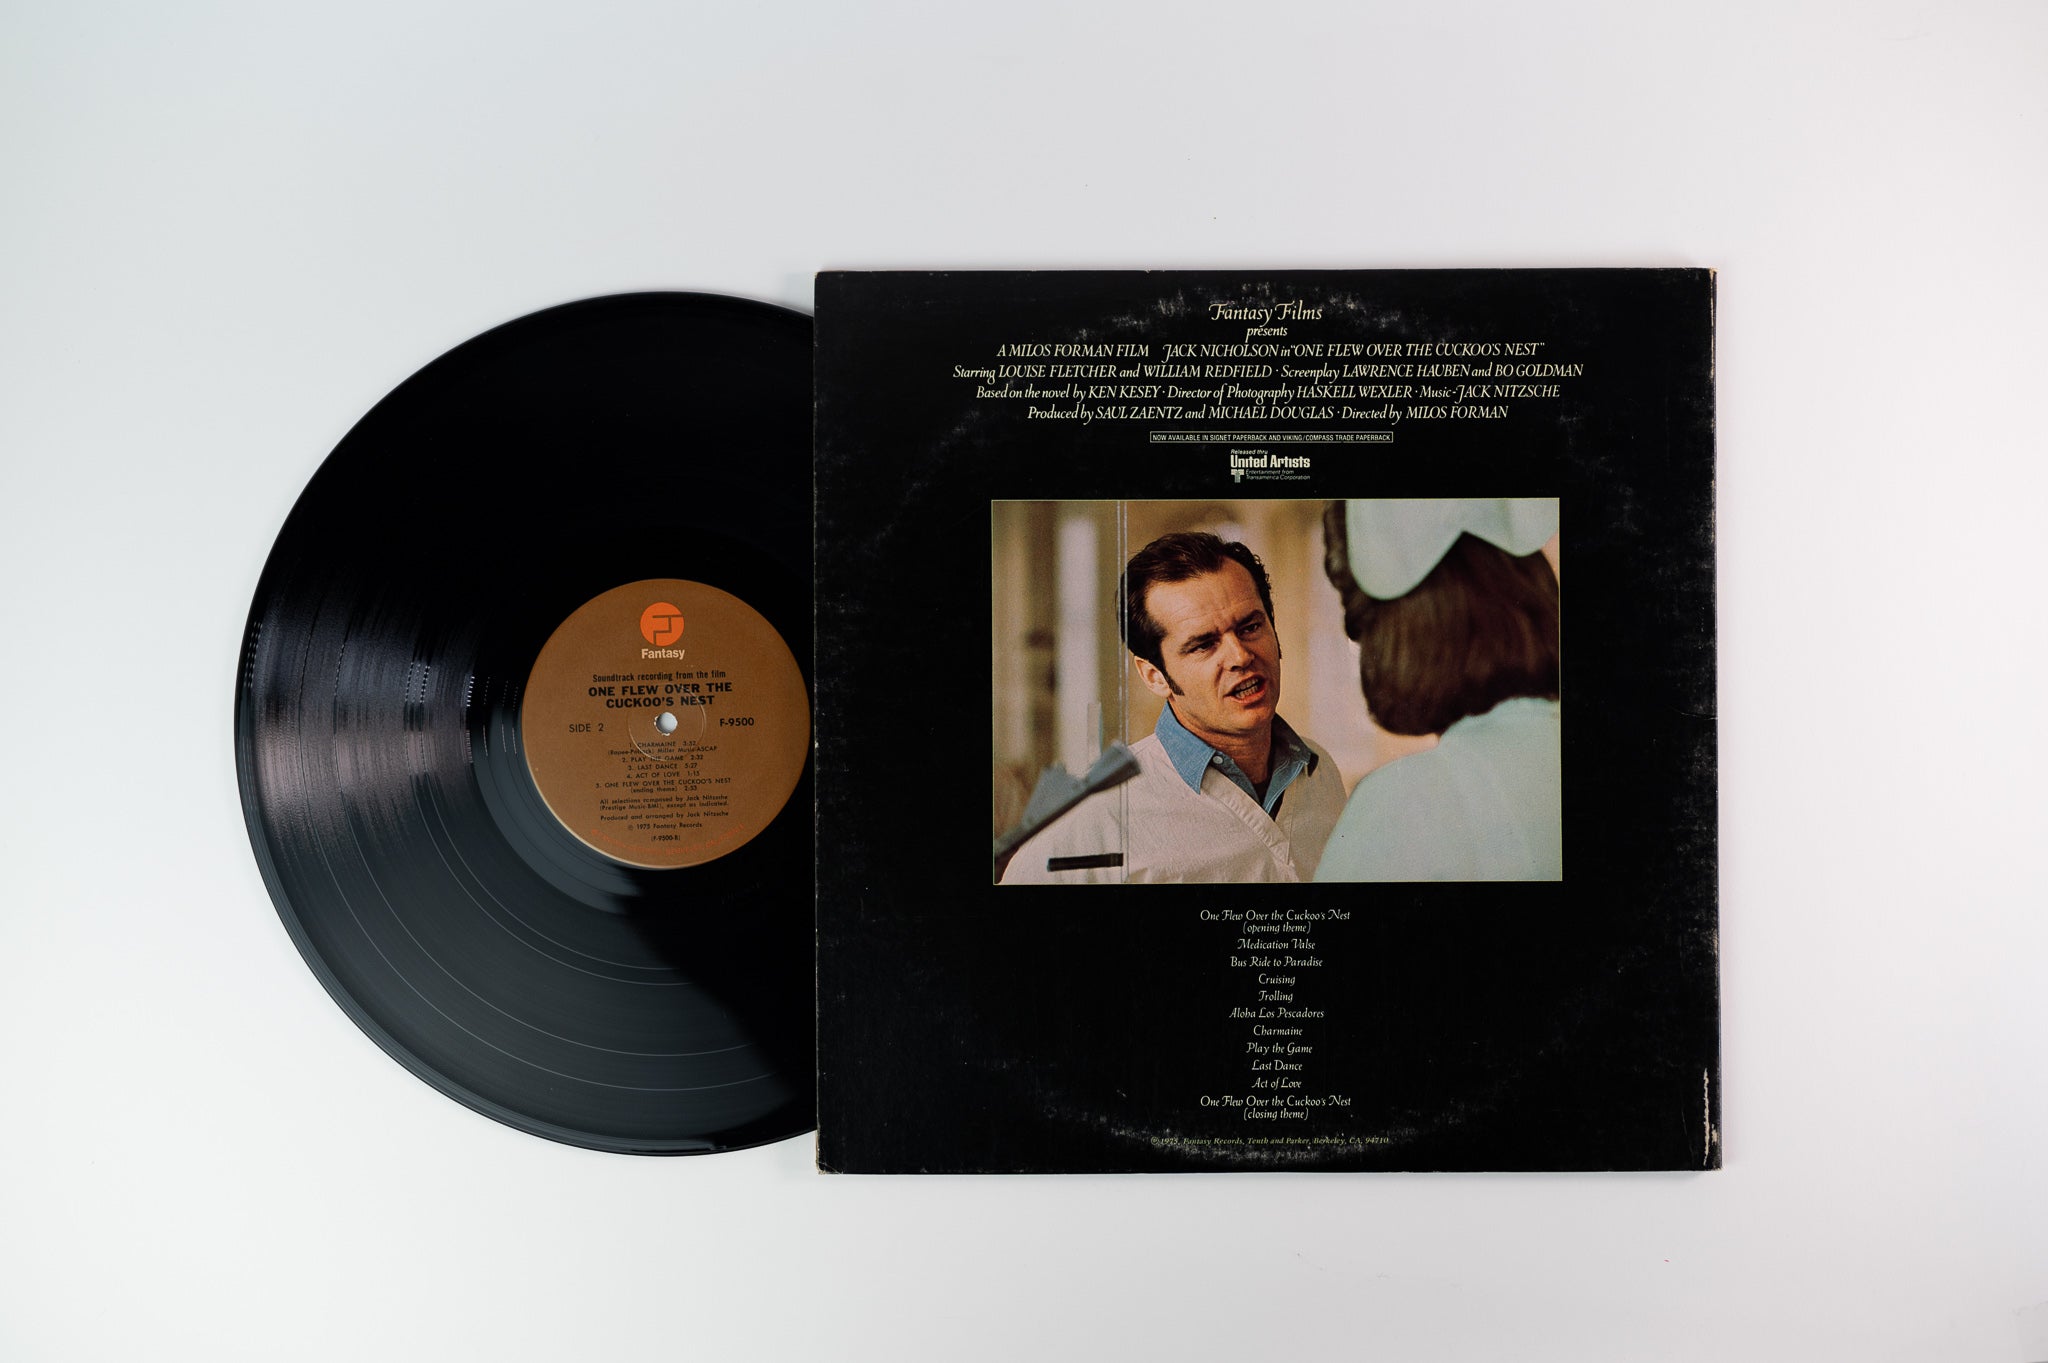 Jack Nitzsche - Soundtrack Recording From The Film : One Flew Over The Cuckoo's Nest on Fantasy